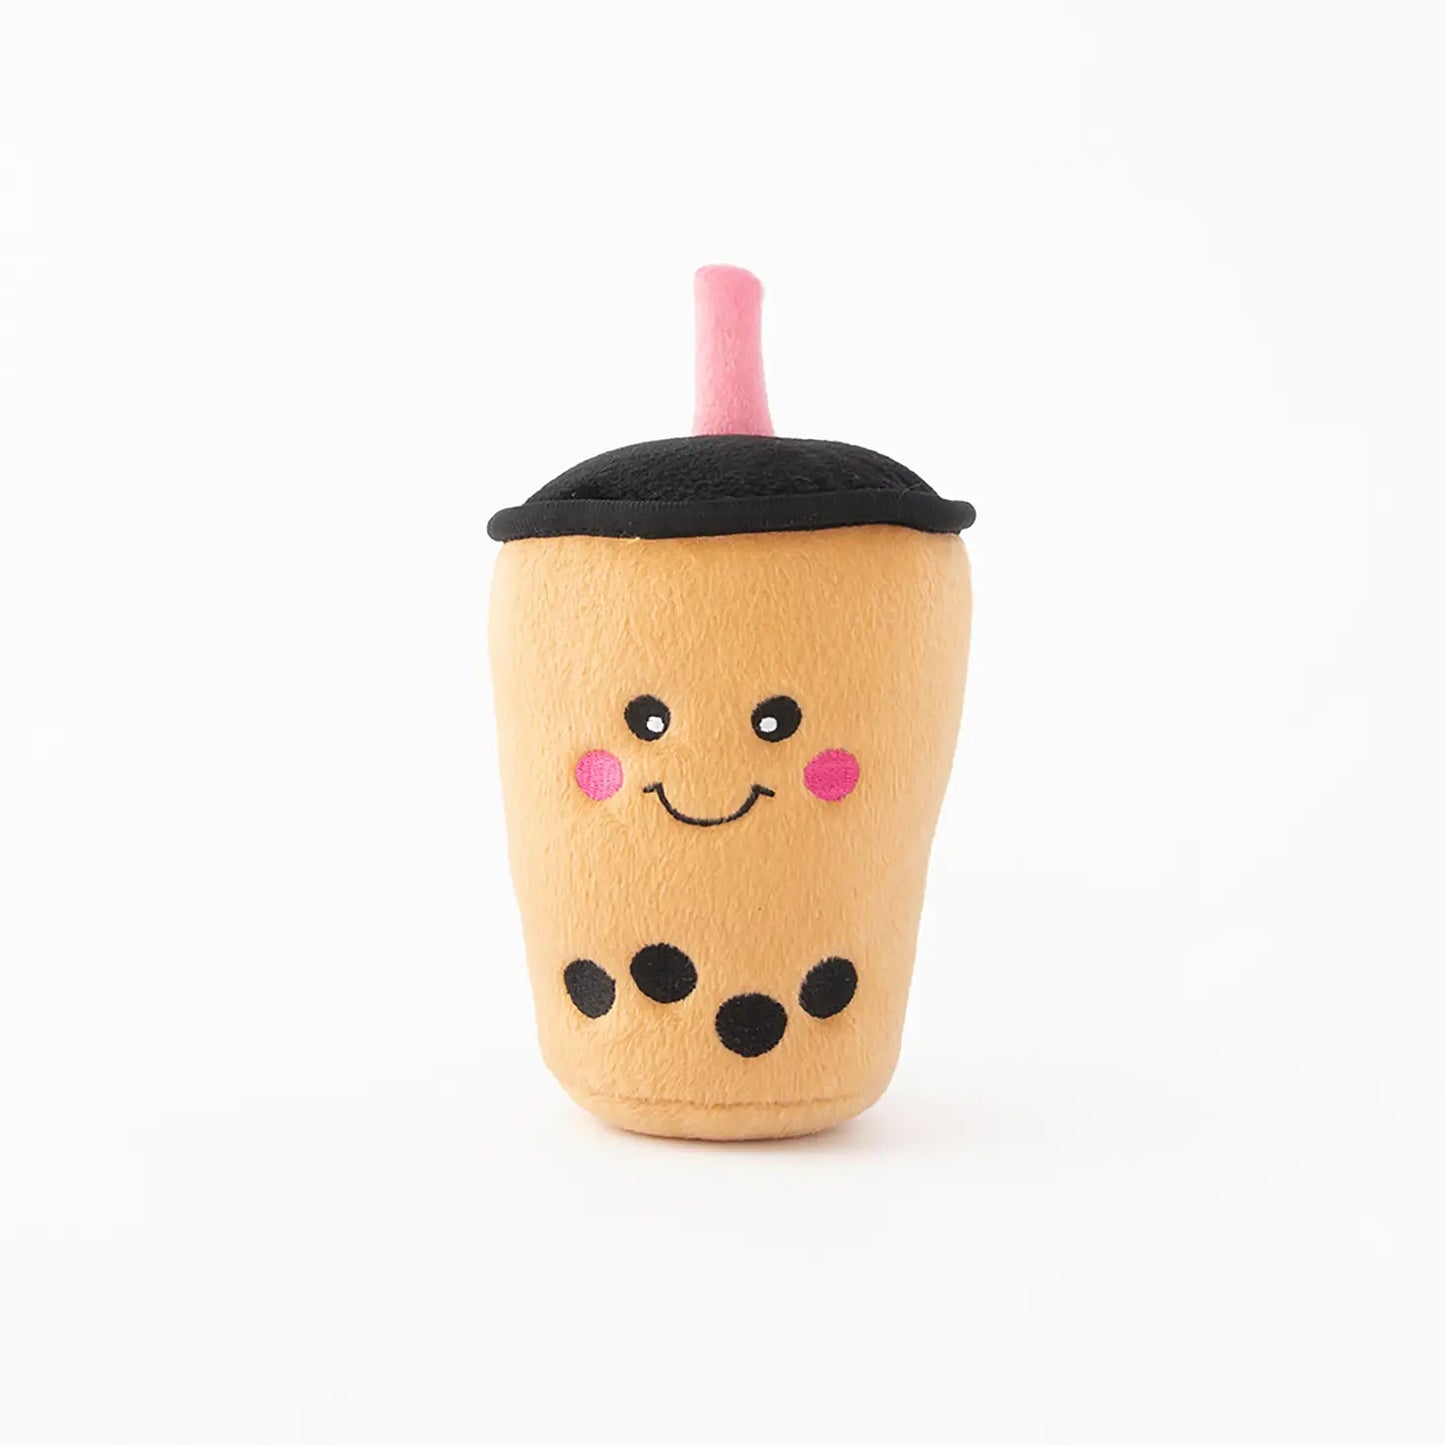 Isolated boba tea plush toy with a pink straw. The boba tea cup has a big smile and rosey cheeks